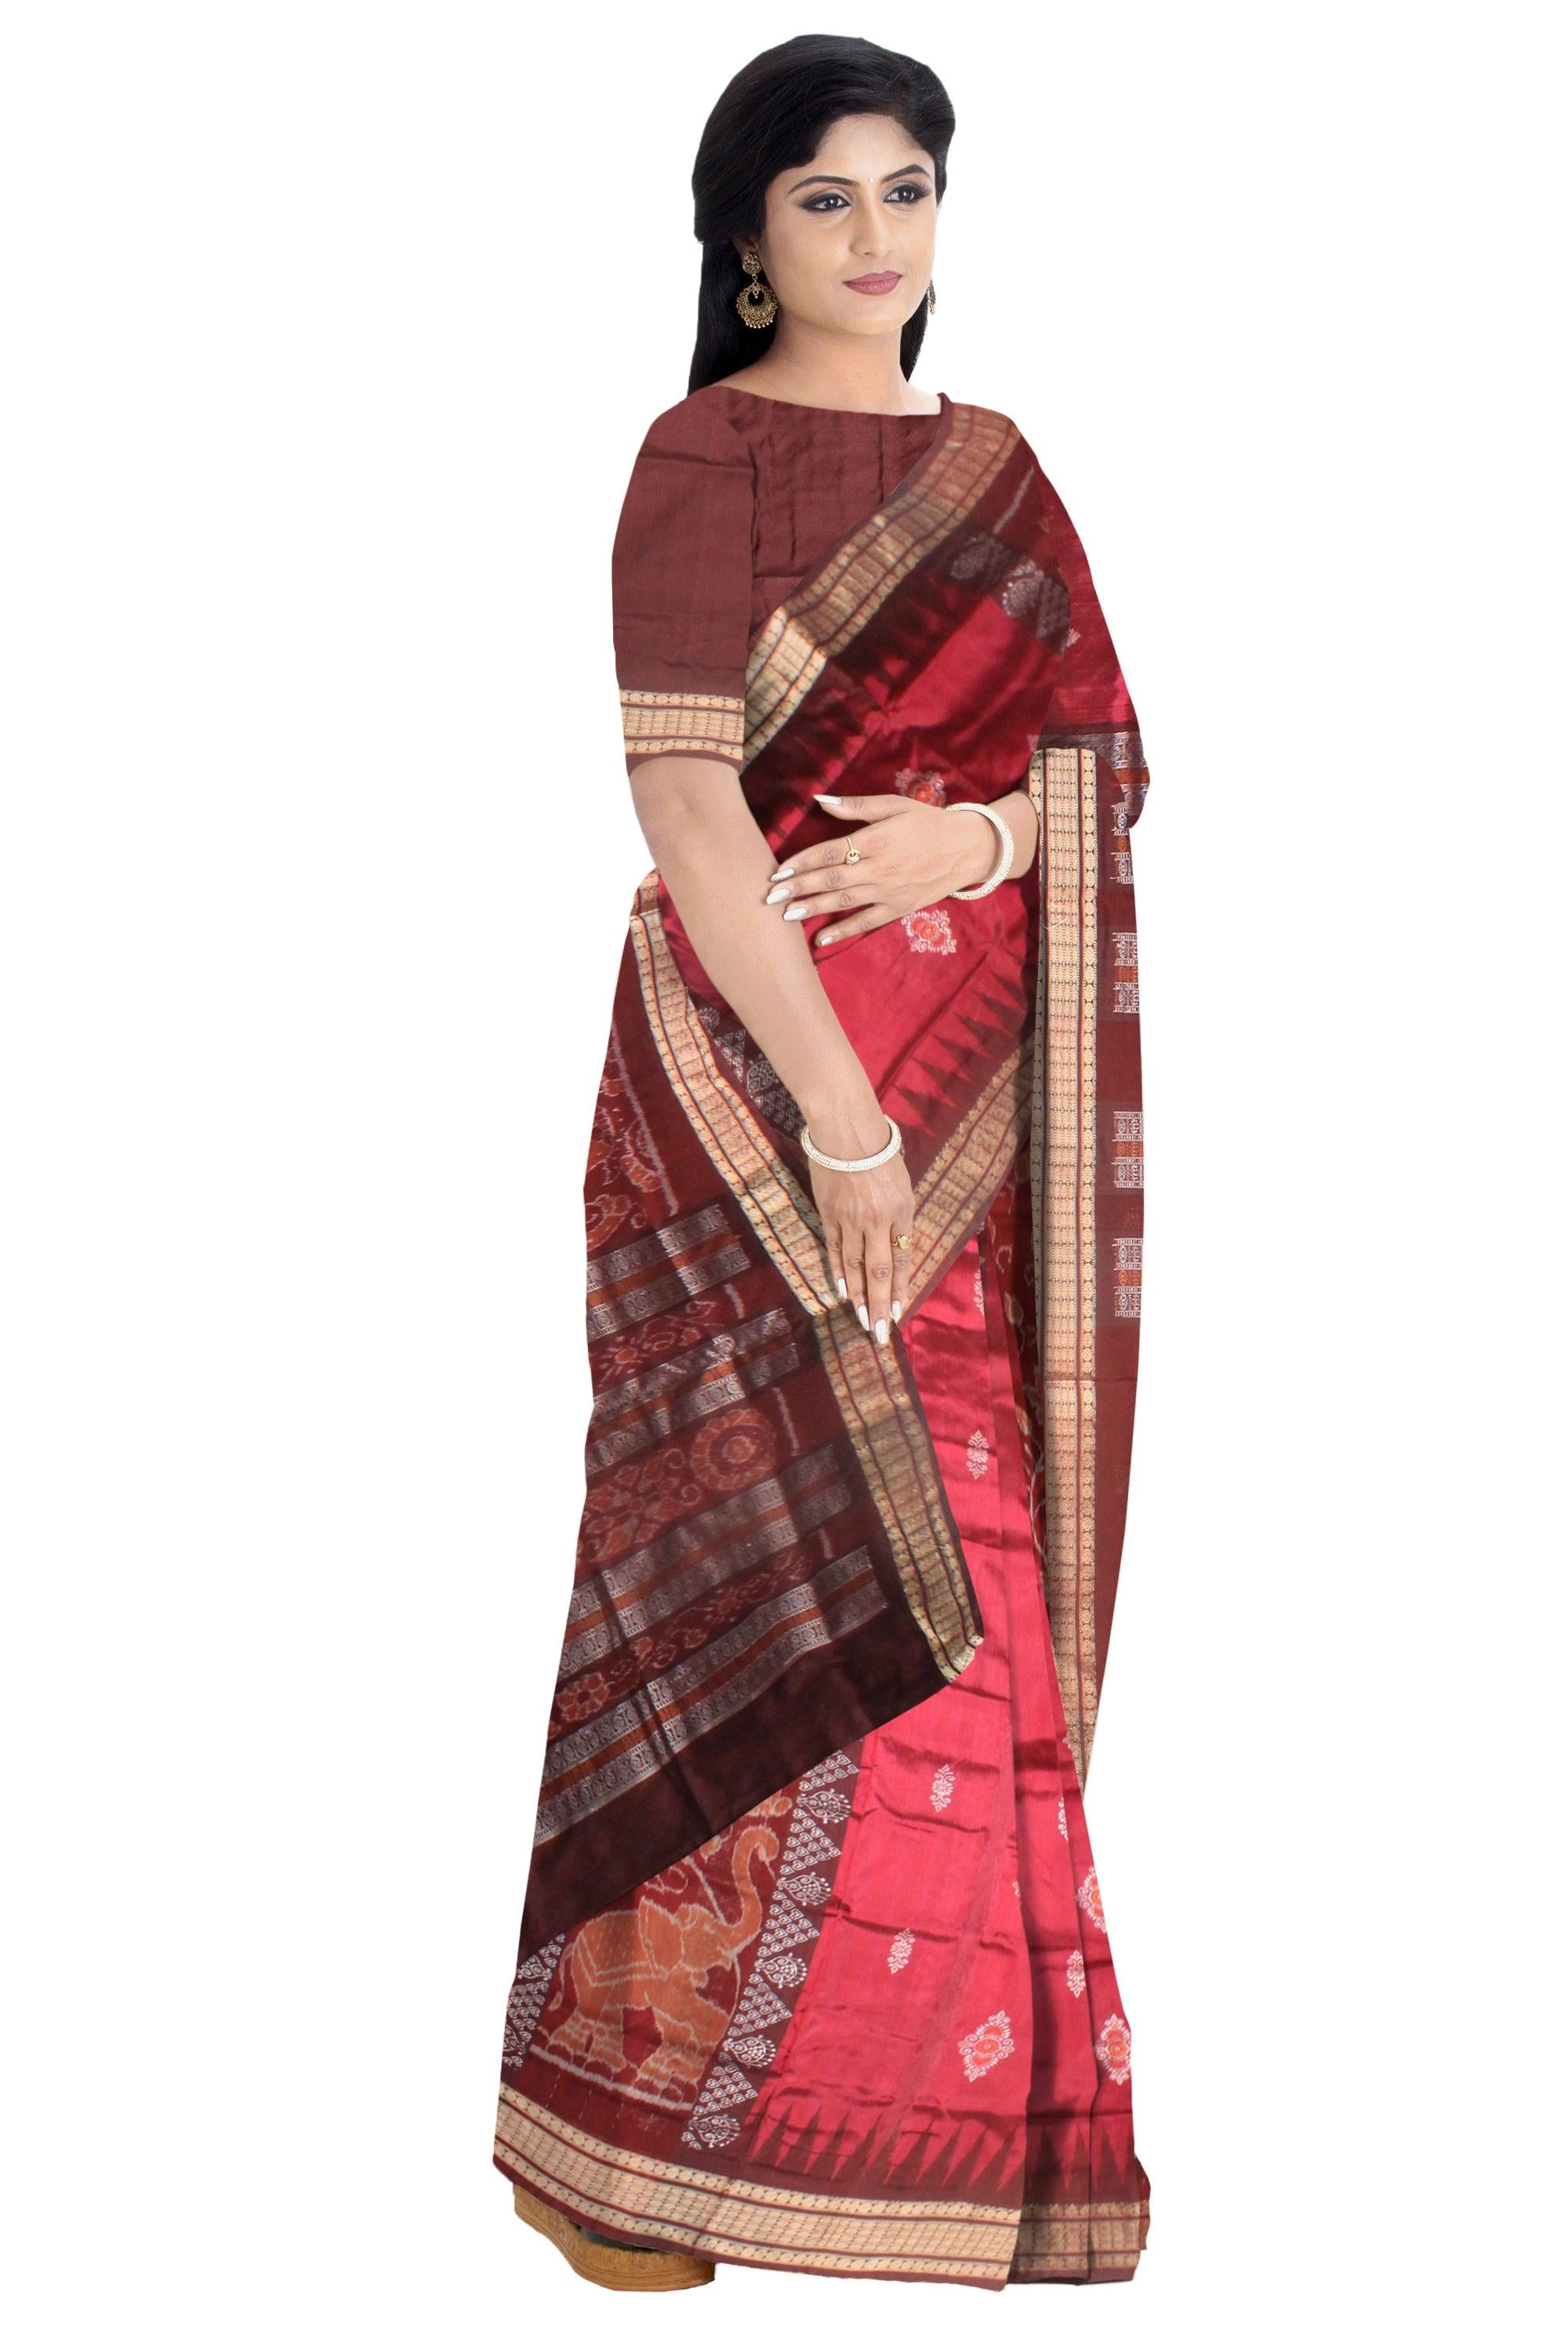 NEW DESIGN  BANDHA SAREE IN ELEPHANT PATTERN,  WITH PINK AND COFFEE COLOR. WITH BLOUSE PIECE. - Koshali Arts & Crafts Enterprise